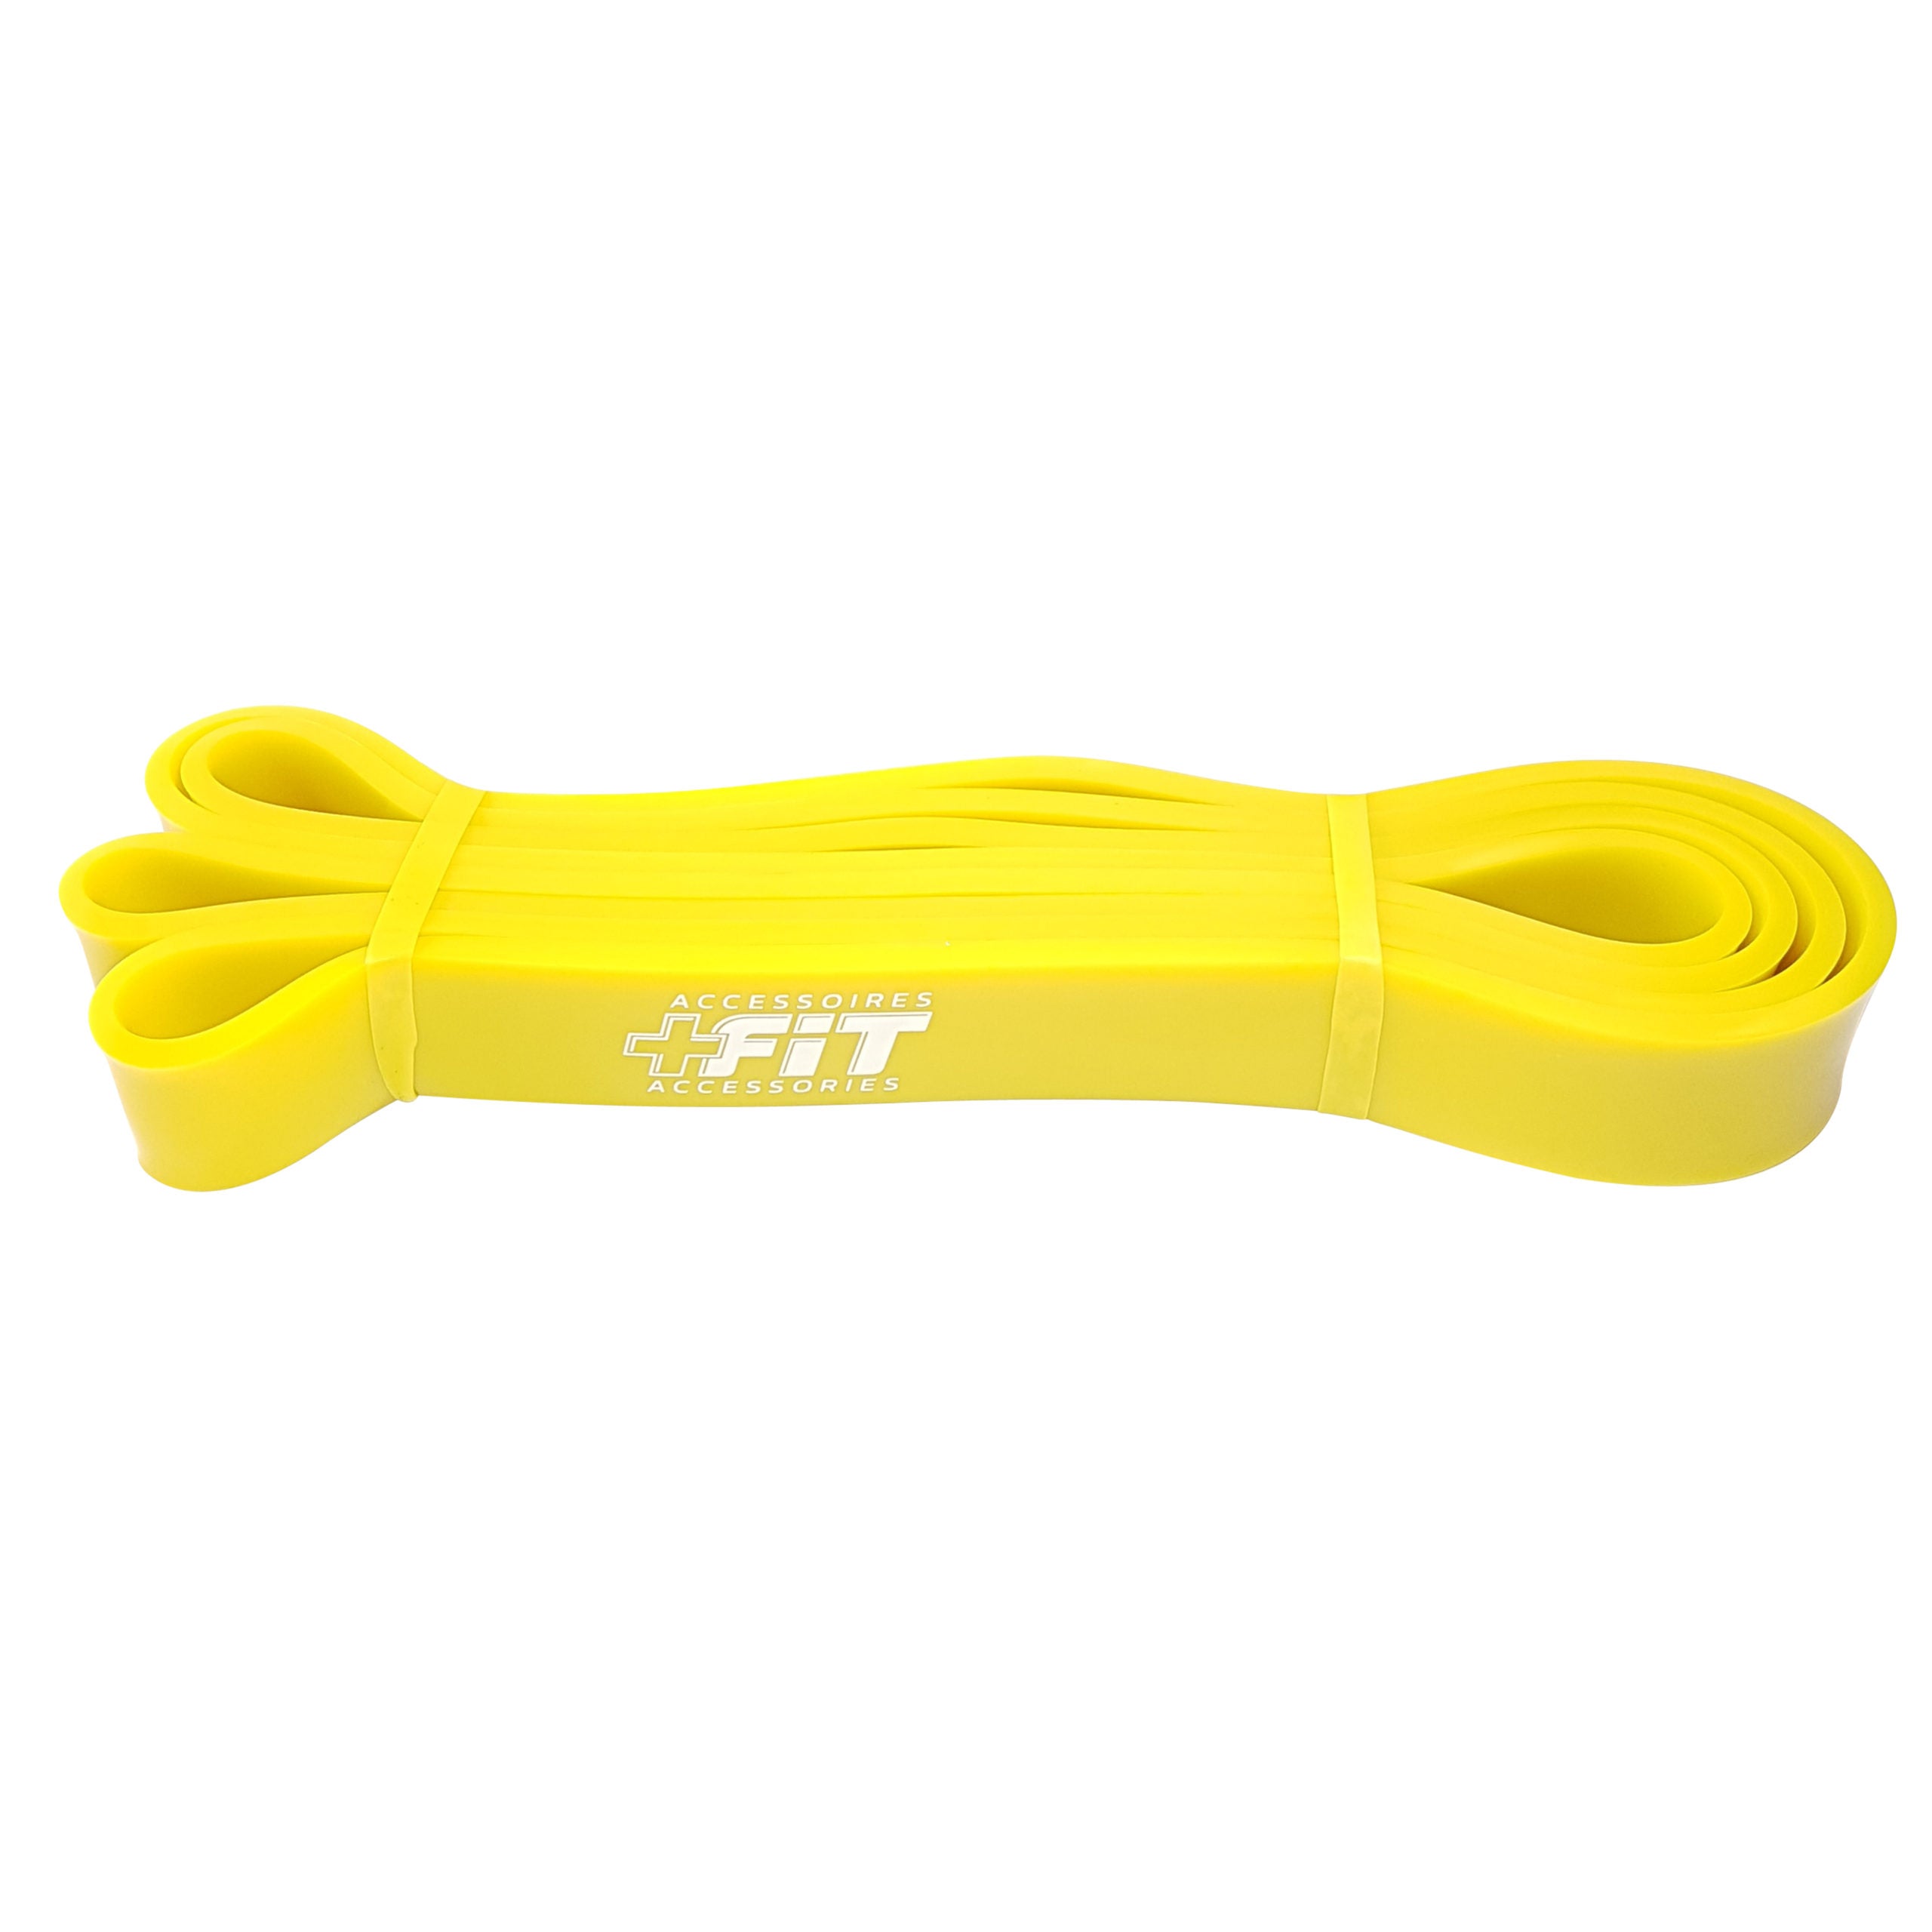 LONG LOOP RESISTANCE BANDS (1 Band) Fitness Accessories Yellow 35-100lbs (1 1/4") Top Nutrition and Fitness